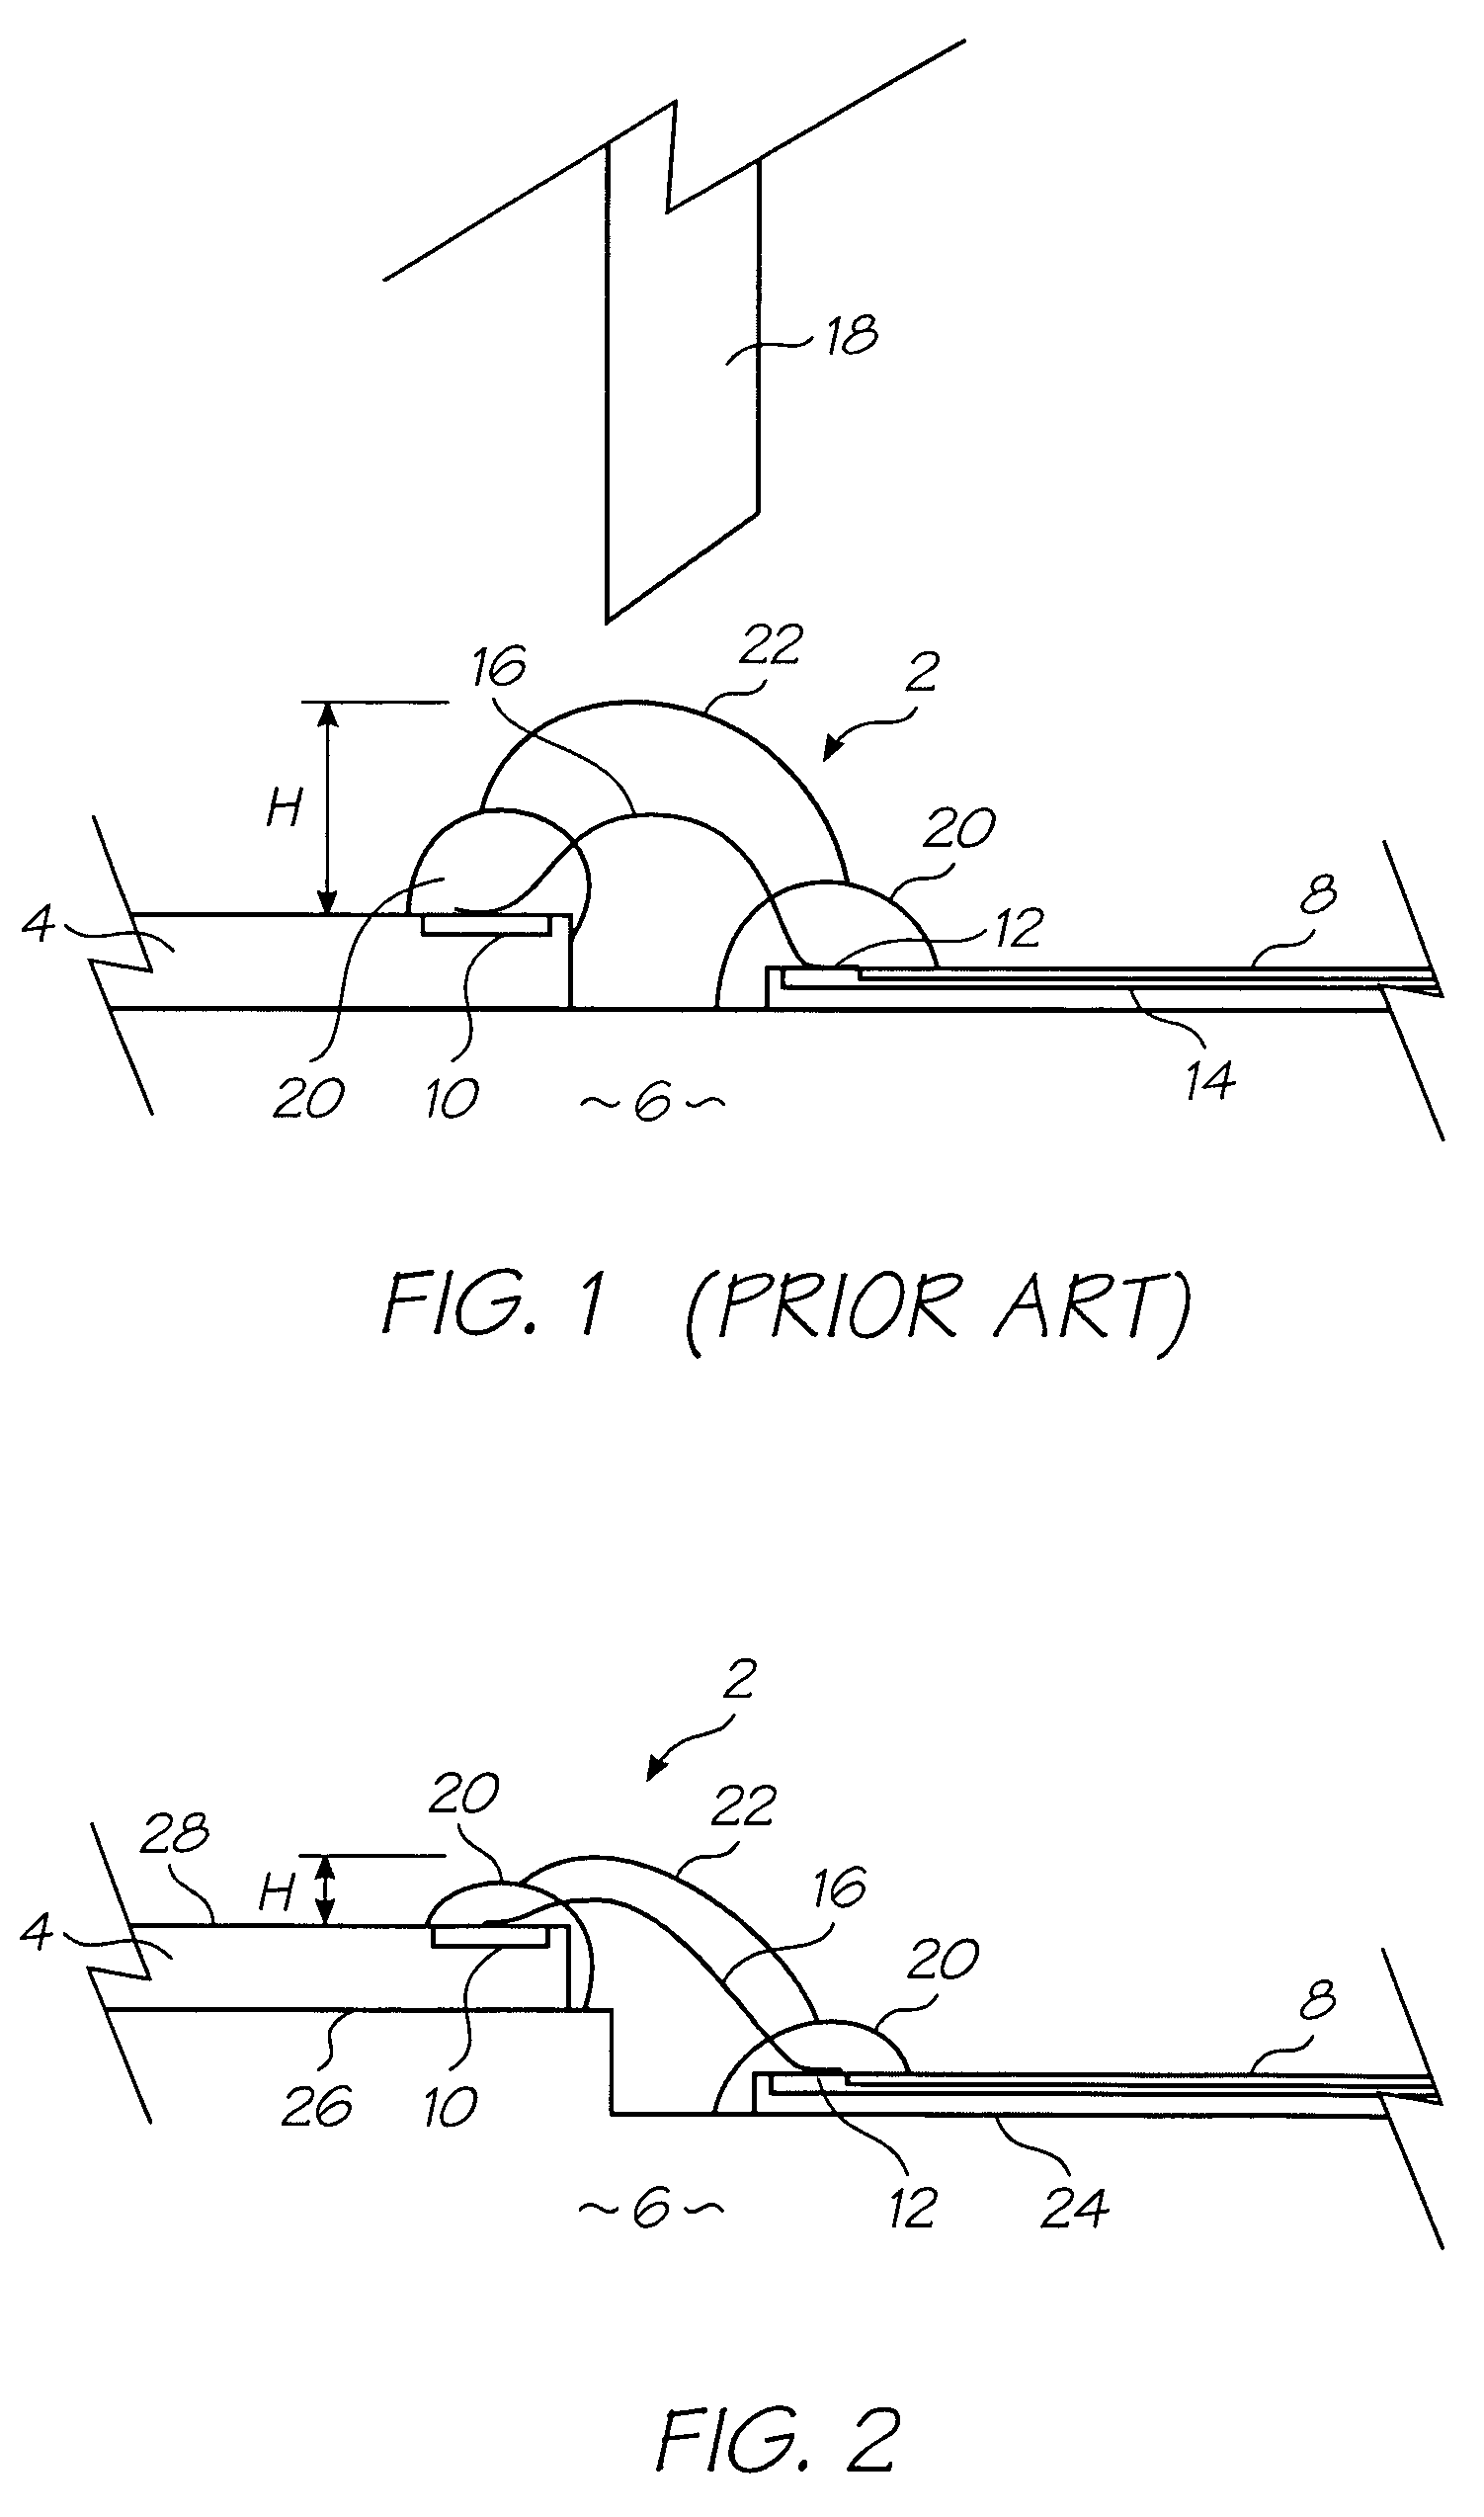 Electronic component with wire bonds in low modulus fill encapsulant